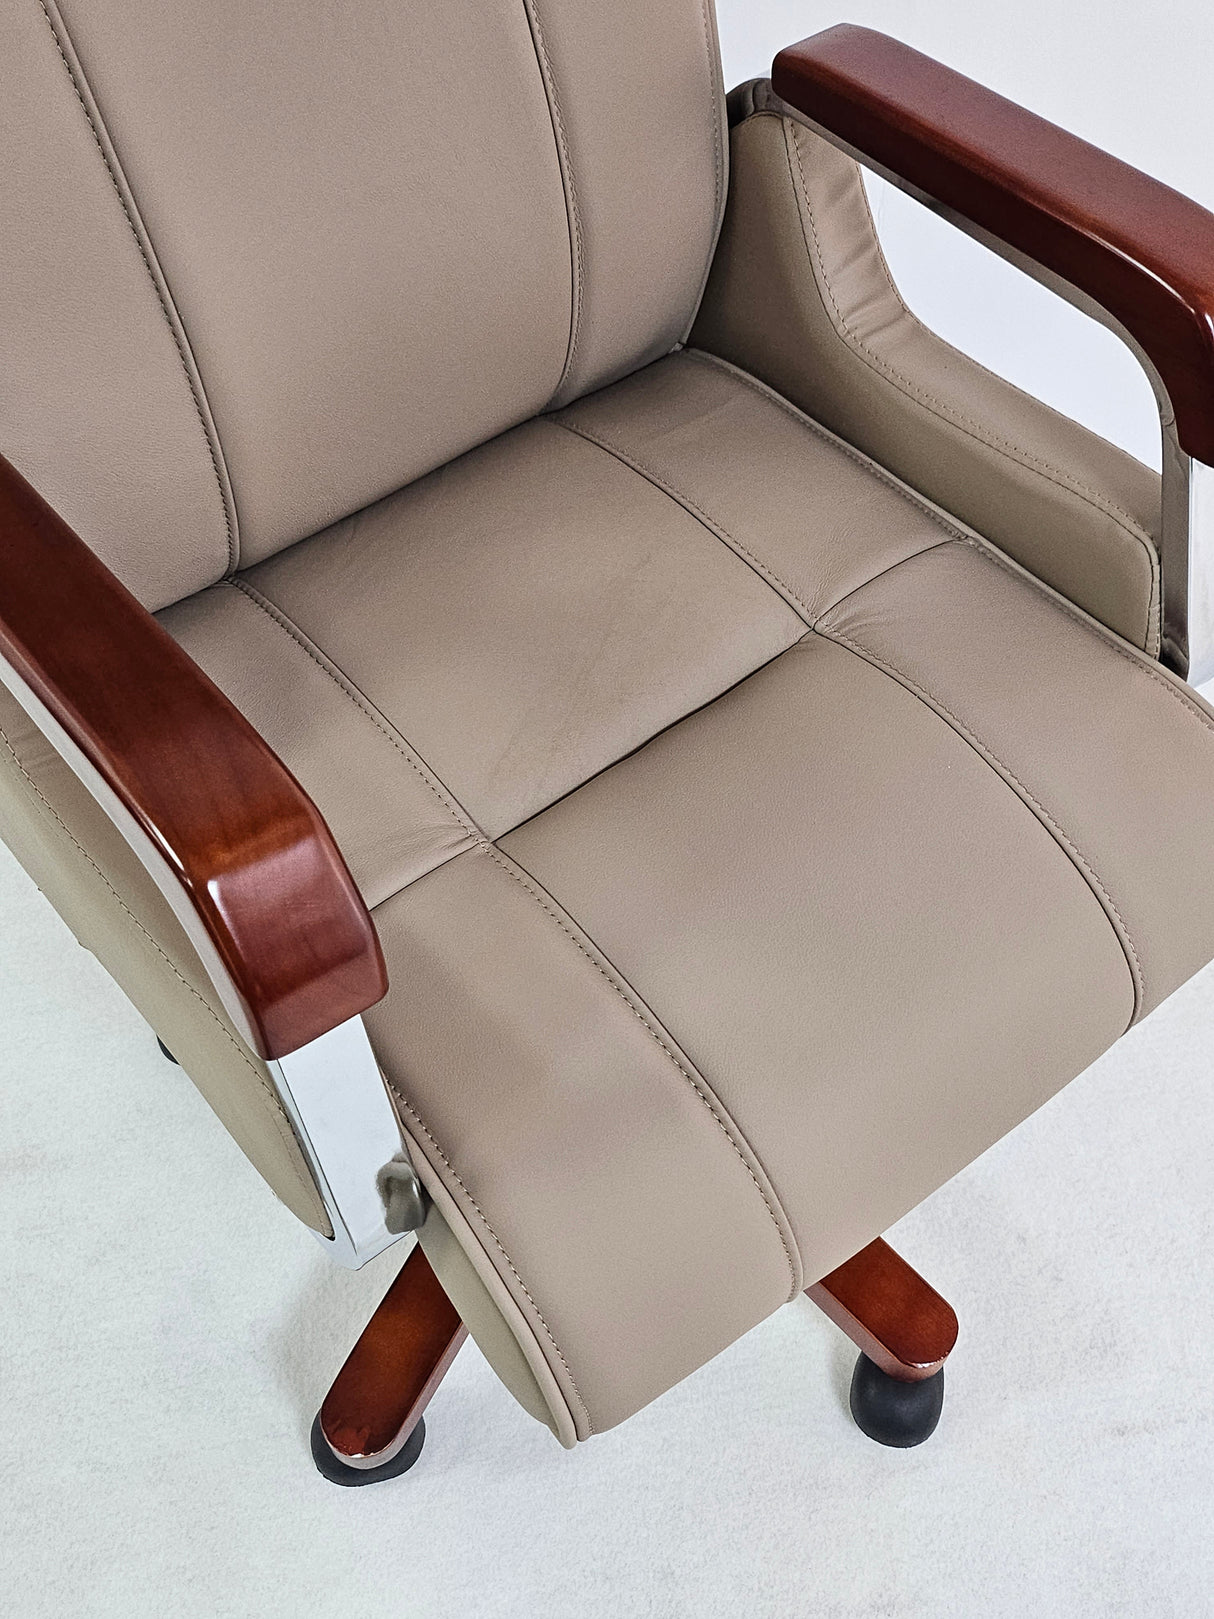 Grey Beige Executive Office Chair in Genuine Leather - HM003B